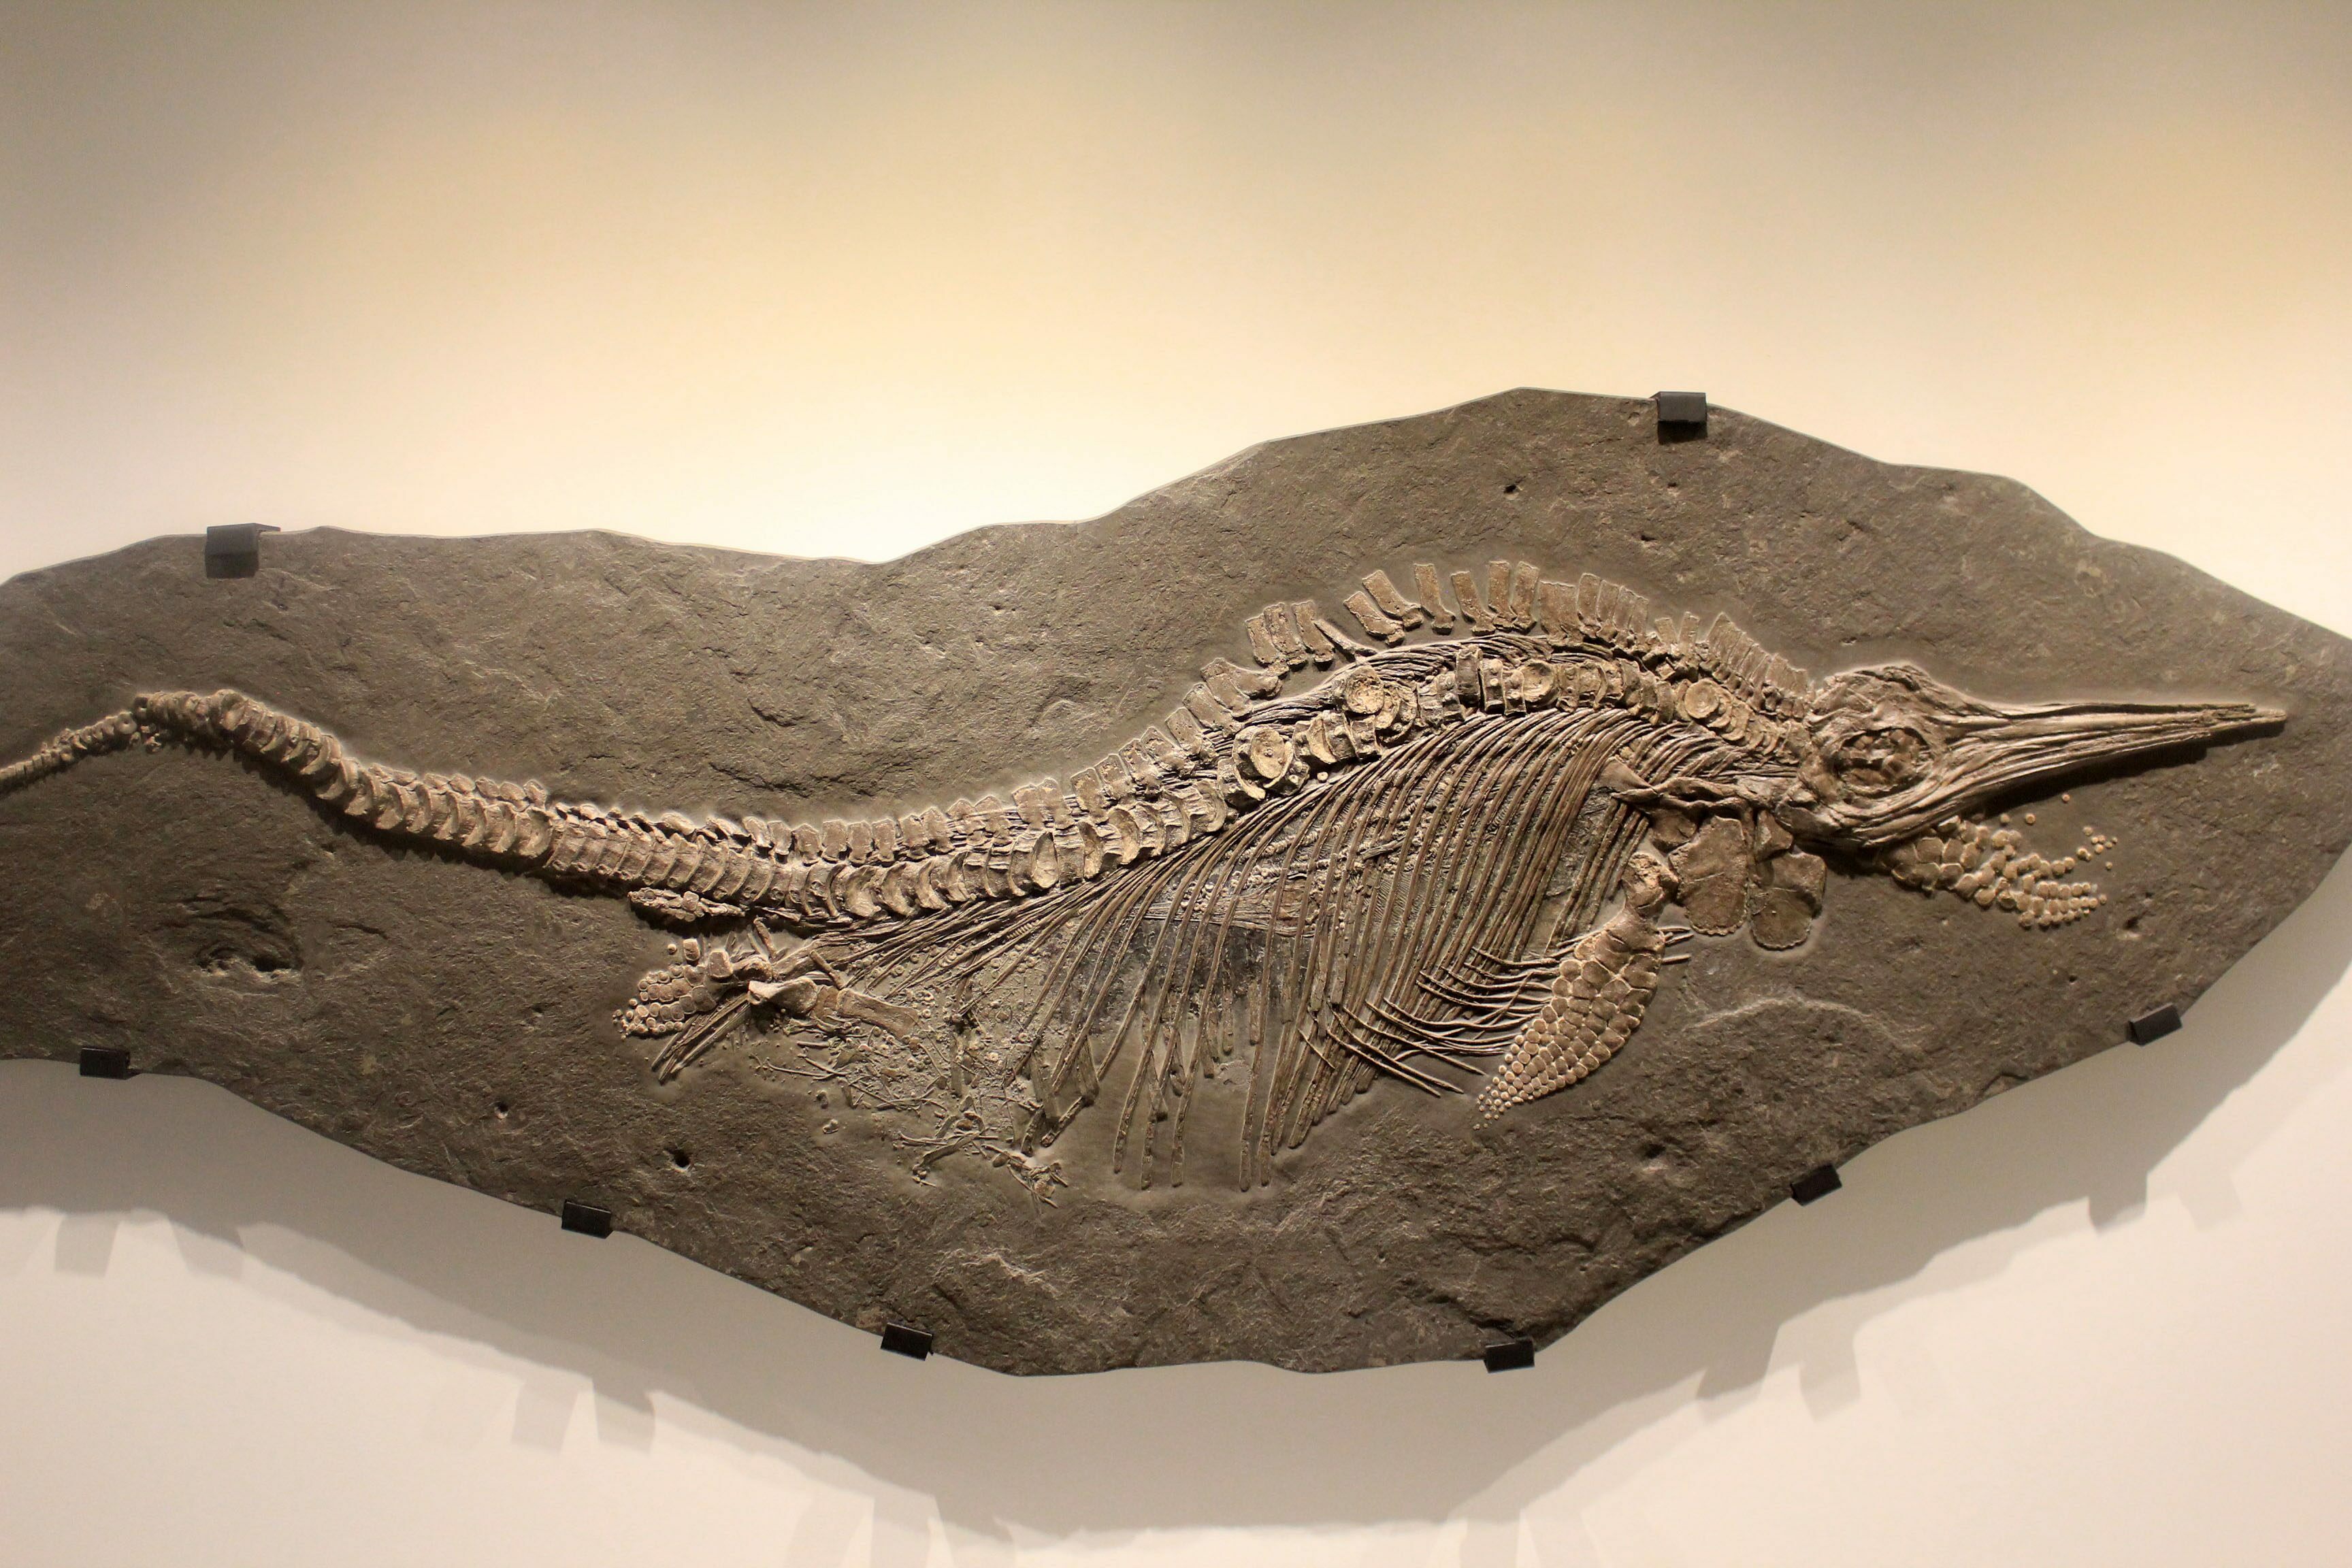 Nevada Unearths an Ancient Surprise: Ichthyosaur Fossil Commemorates a Brewery Pioneer!